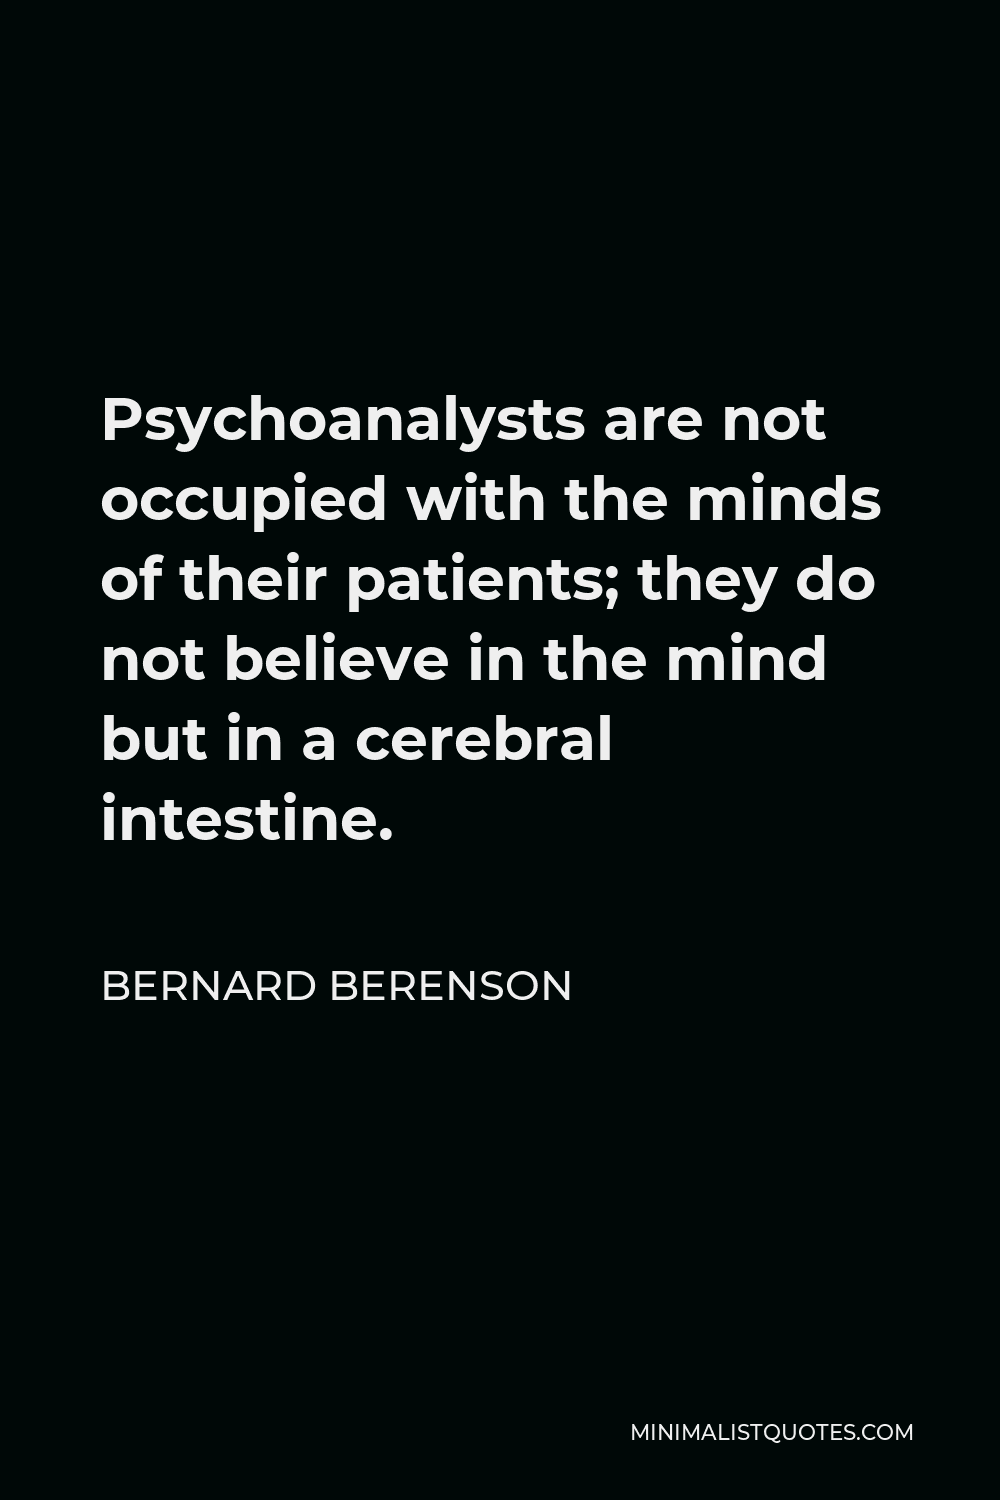 Bernard Berenson Quote - Psychoanalysts are not occupied with the minds of their patients; they do not believe in the mind but in a cerebral intestine.